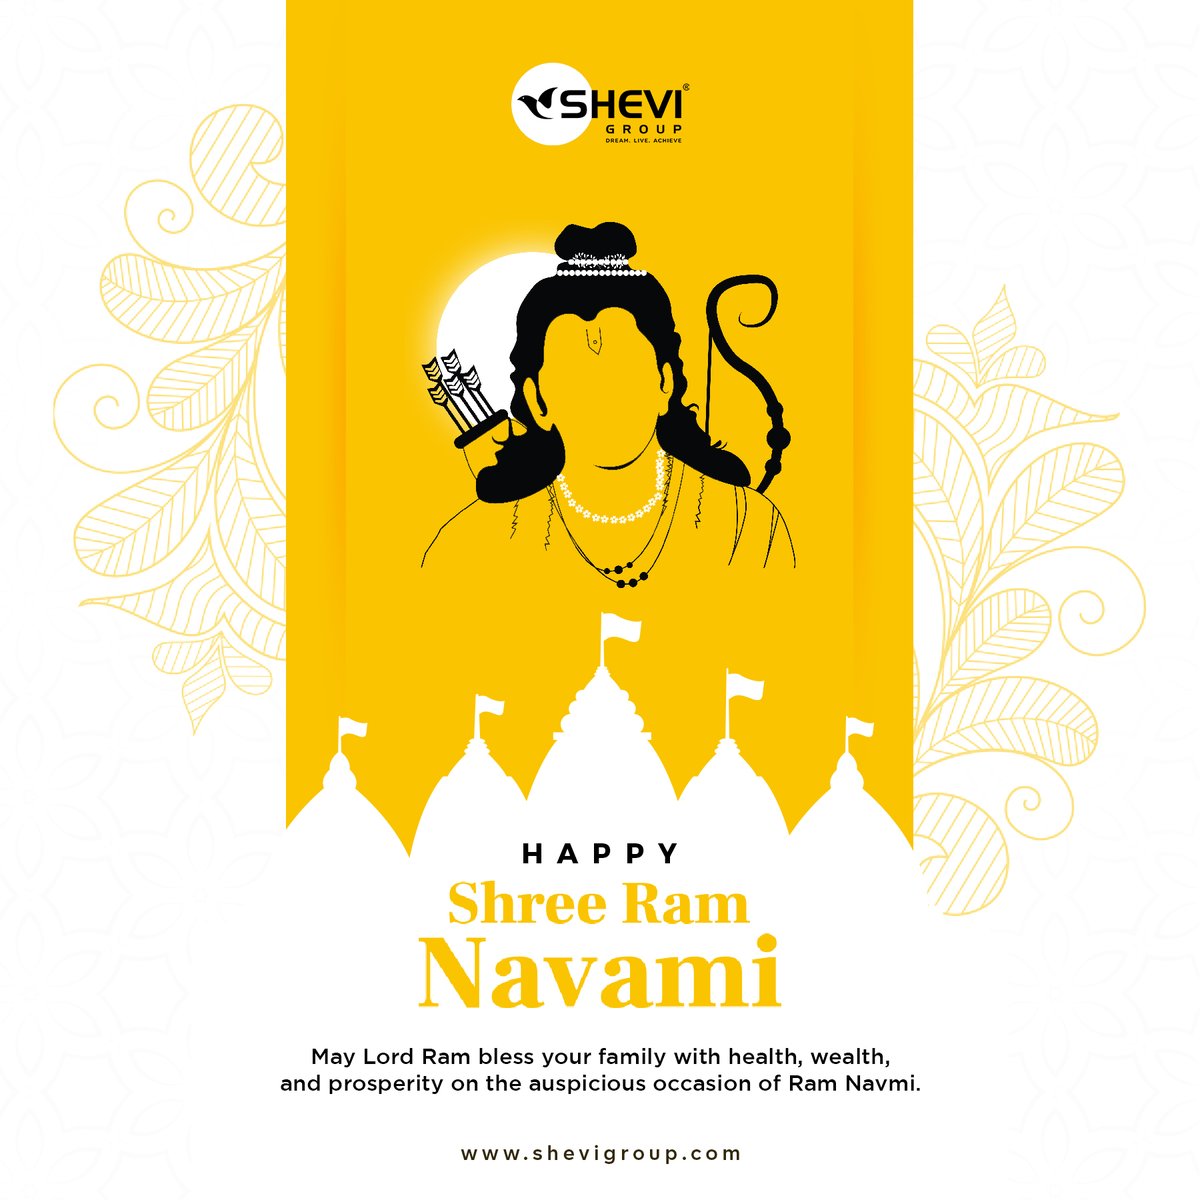 Shevi Group wishes you a very happy Ram Navami! May Lord Ram bless you and your family with health, wealth, and prosperity on this auspicious occasion. 

#SheviGroup #RamNavami #FestiveGreetings #LoveAndCompassion #lordrama #residential #LuxuryLiving #premiumhomes #ramnavmi🙏